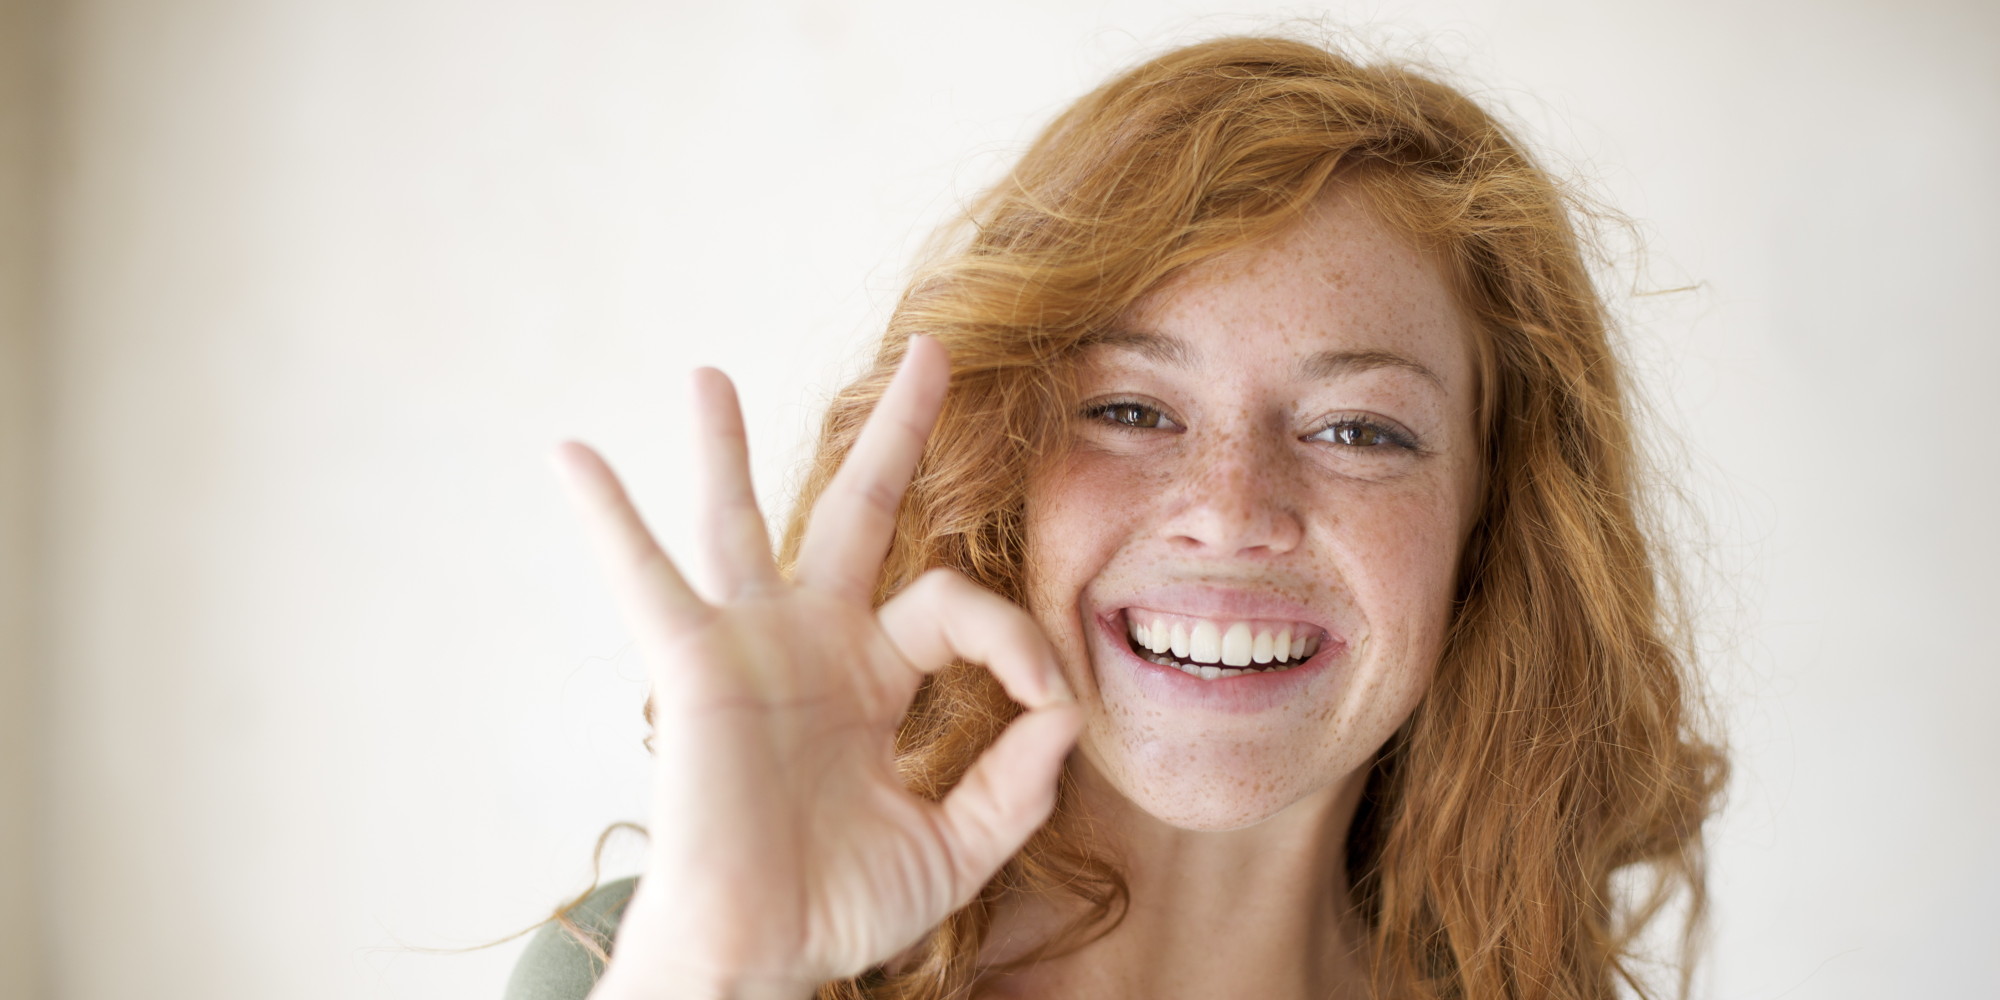 Optimistic Young Woman with Freckles